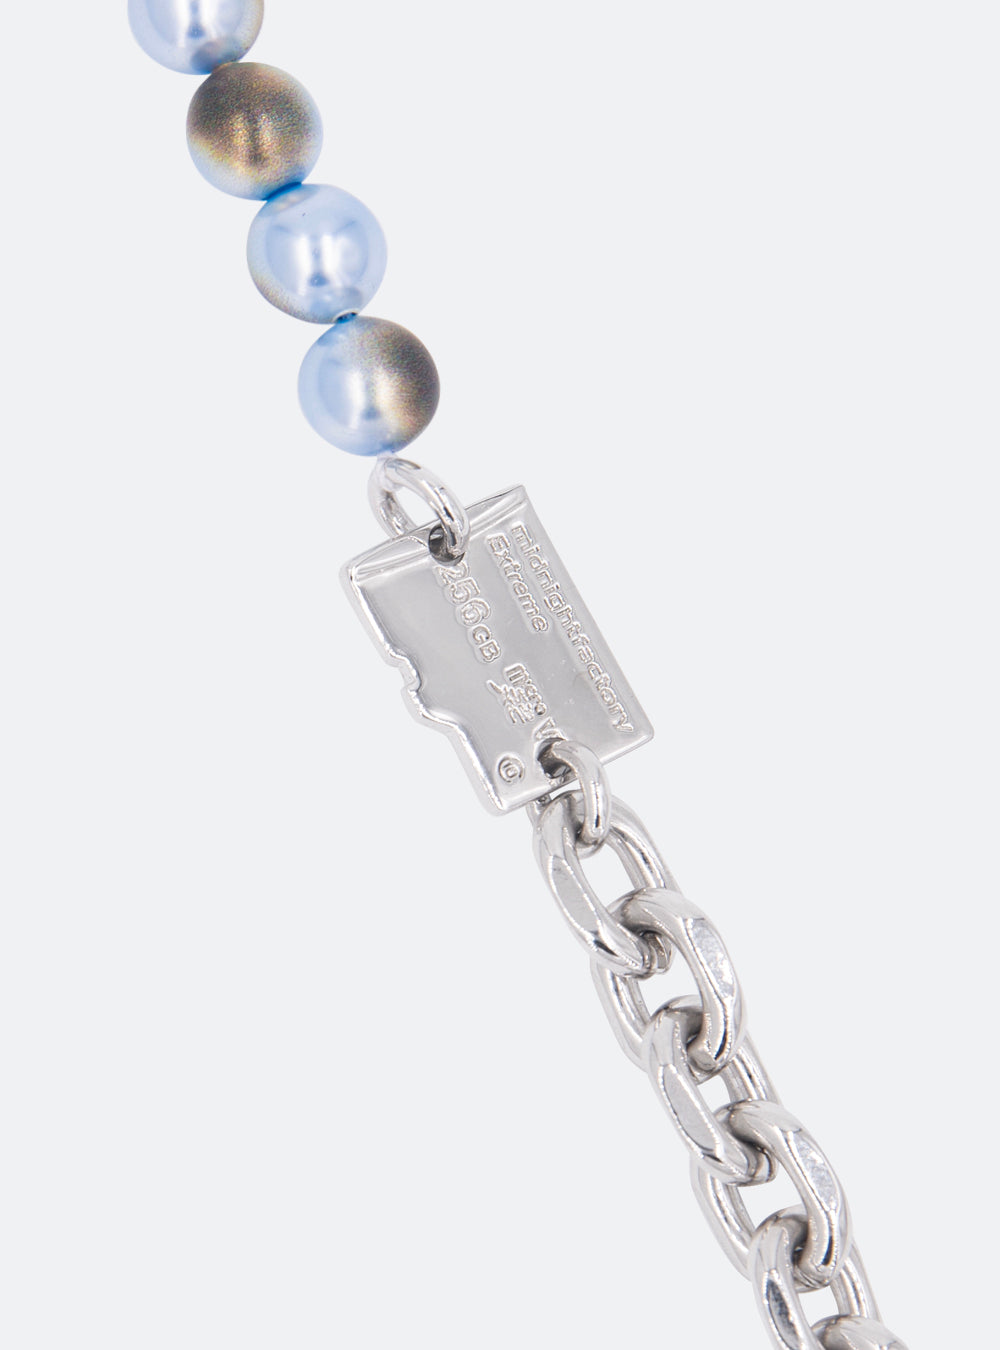 A Micro-SD sky-blue burnt pearls necklace from MIDNIGHTFACTORY with a silver clasp that has an adjustable length. [Pre-order]